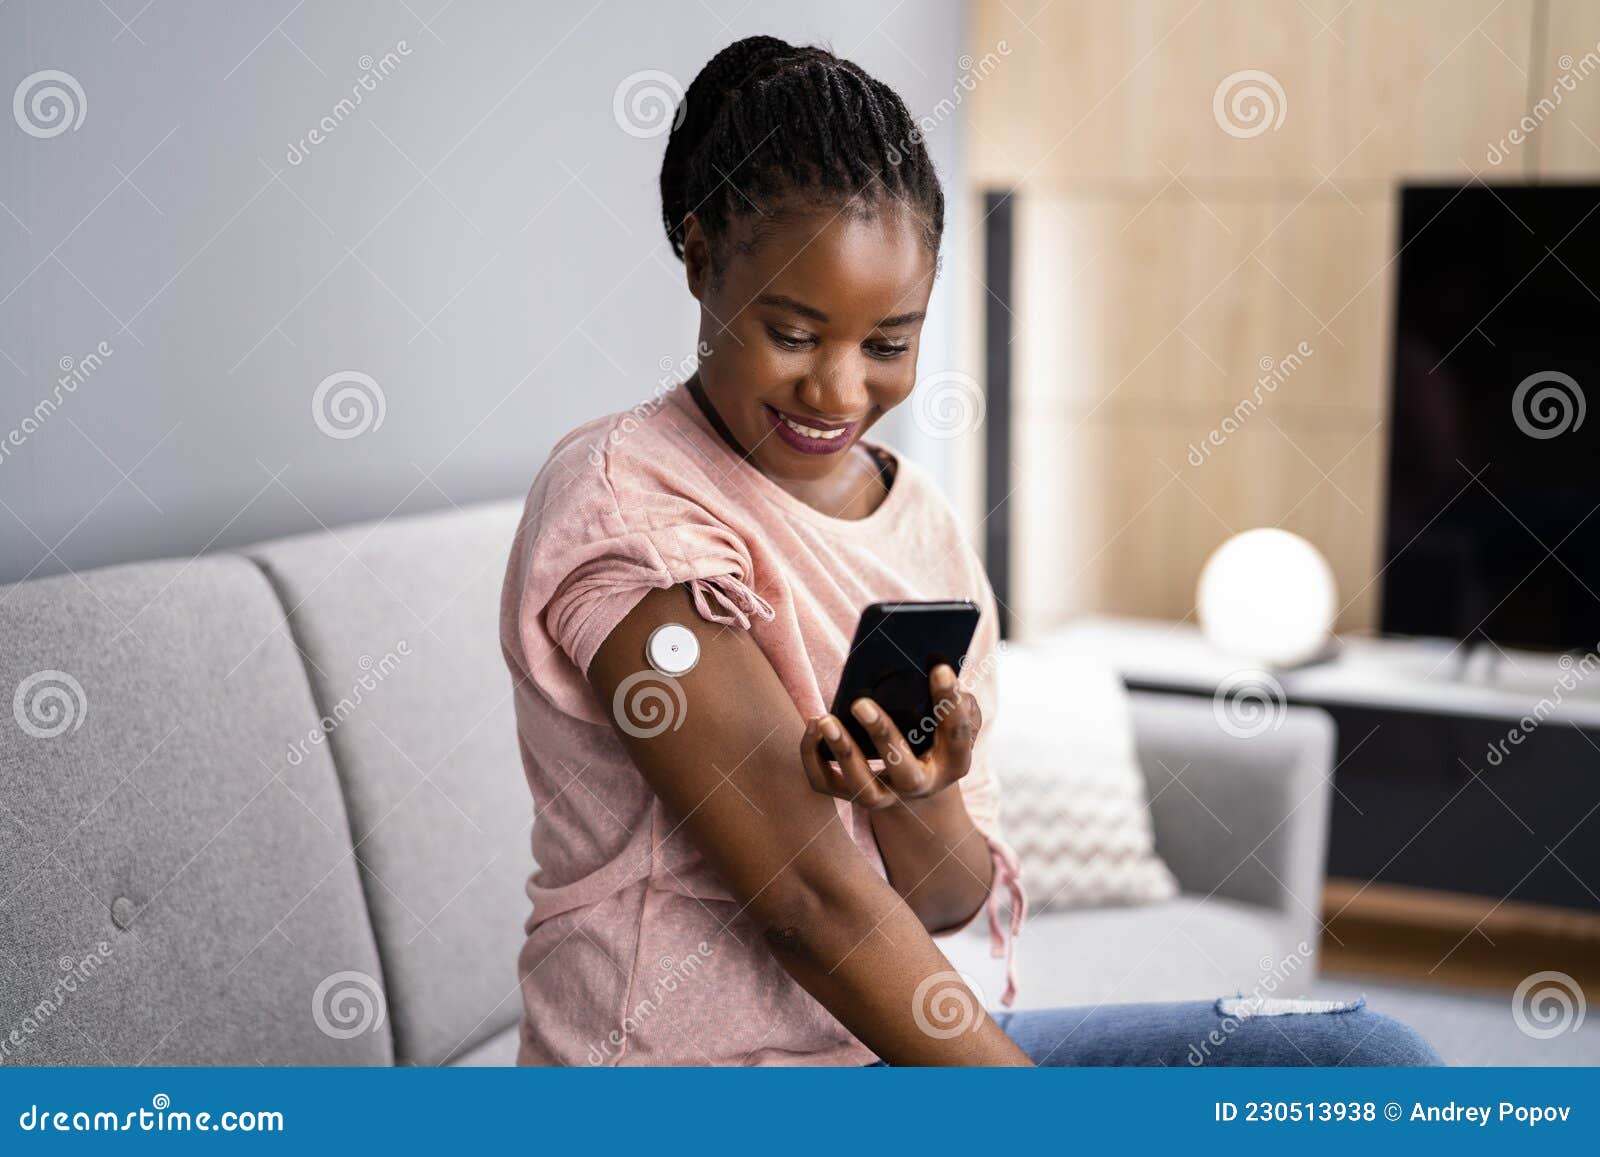 woman testing glucose level with continuous glucose monitor